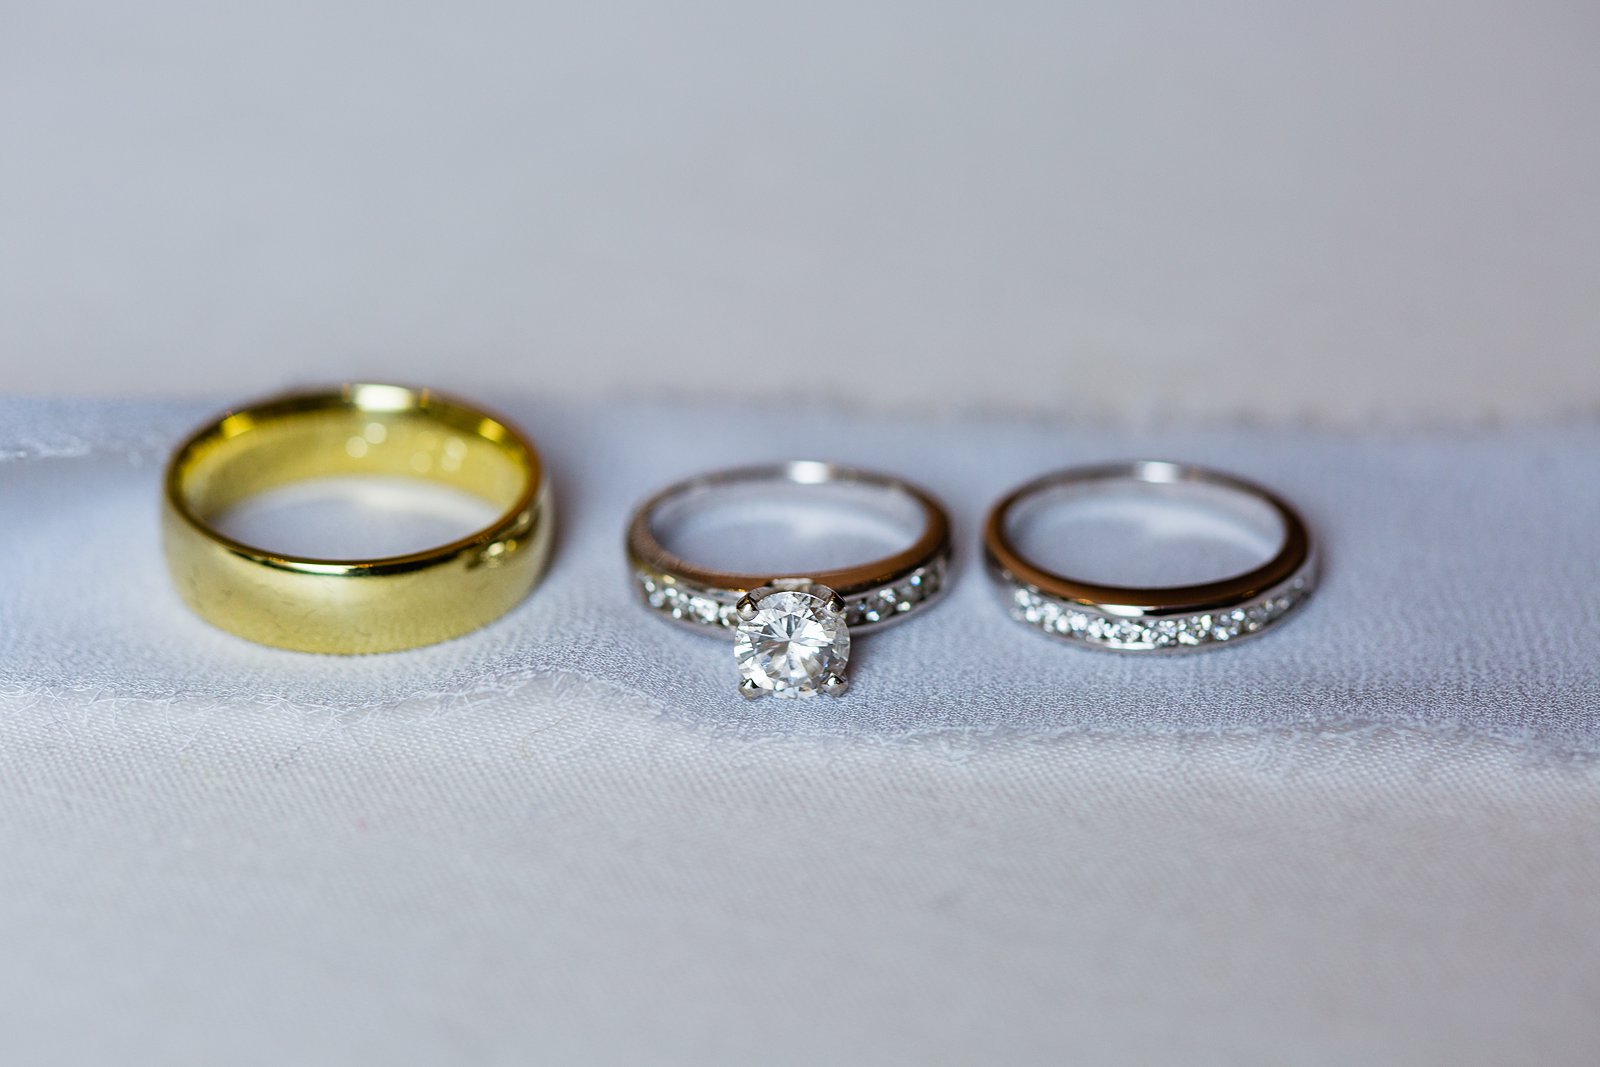 Bride and grooms simple wedding bands by PMA Photography.